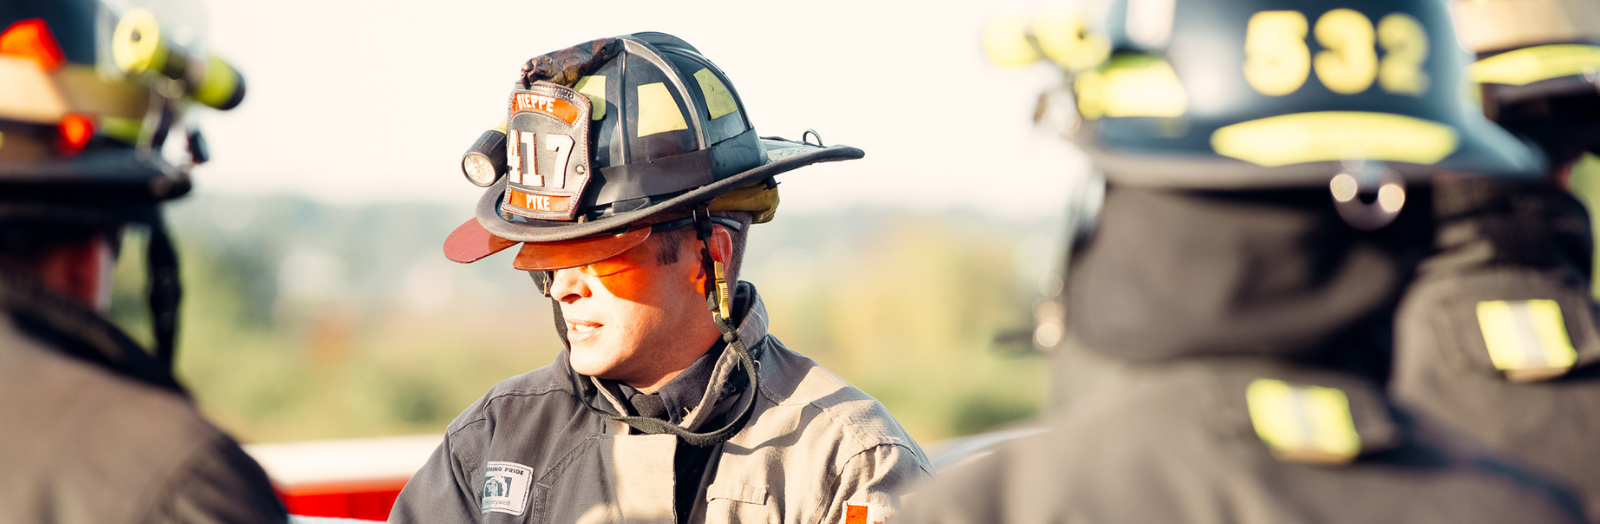 Firefighter speaking with other firefighters